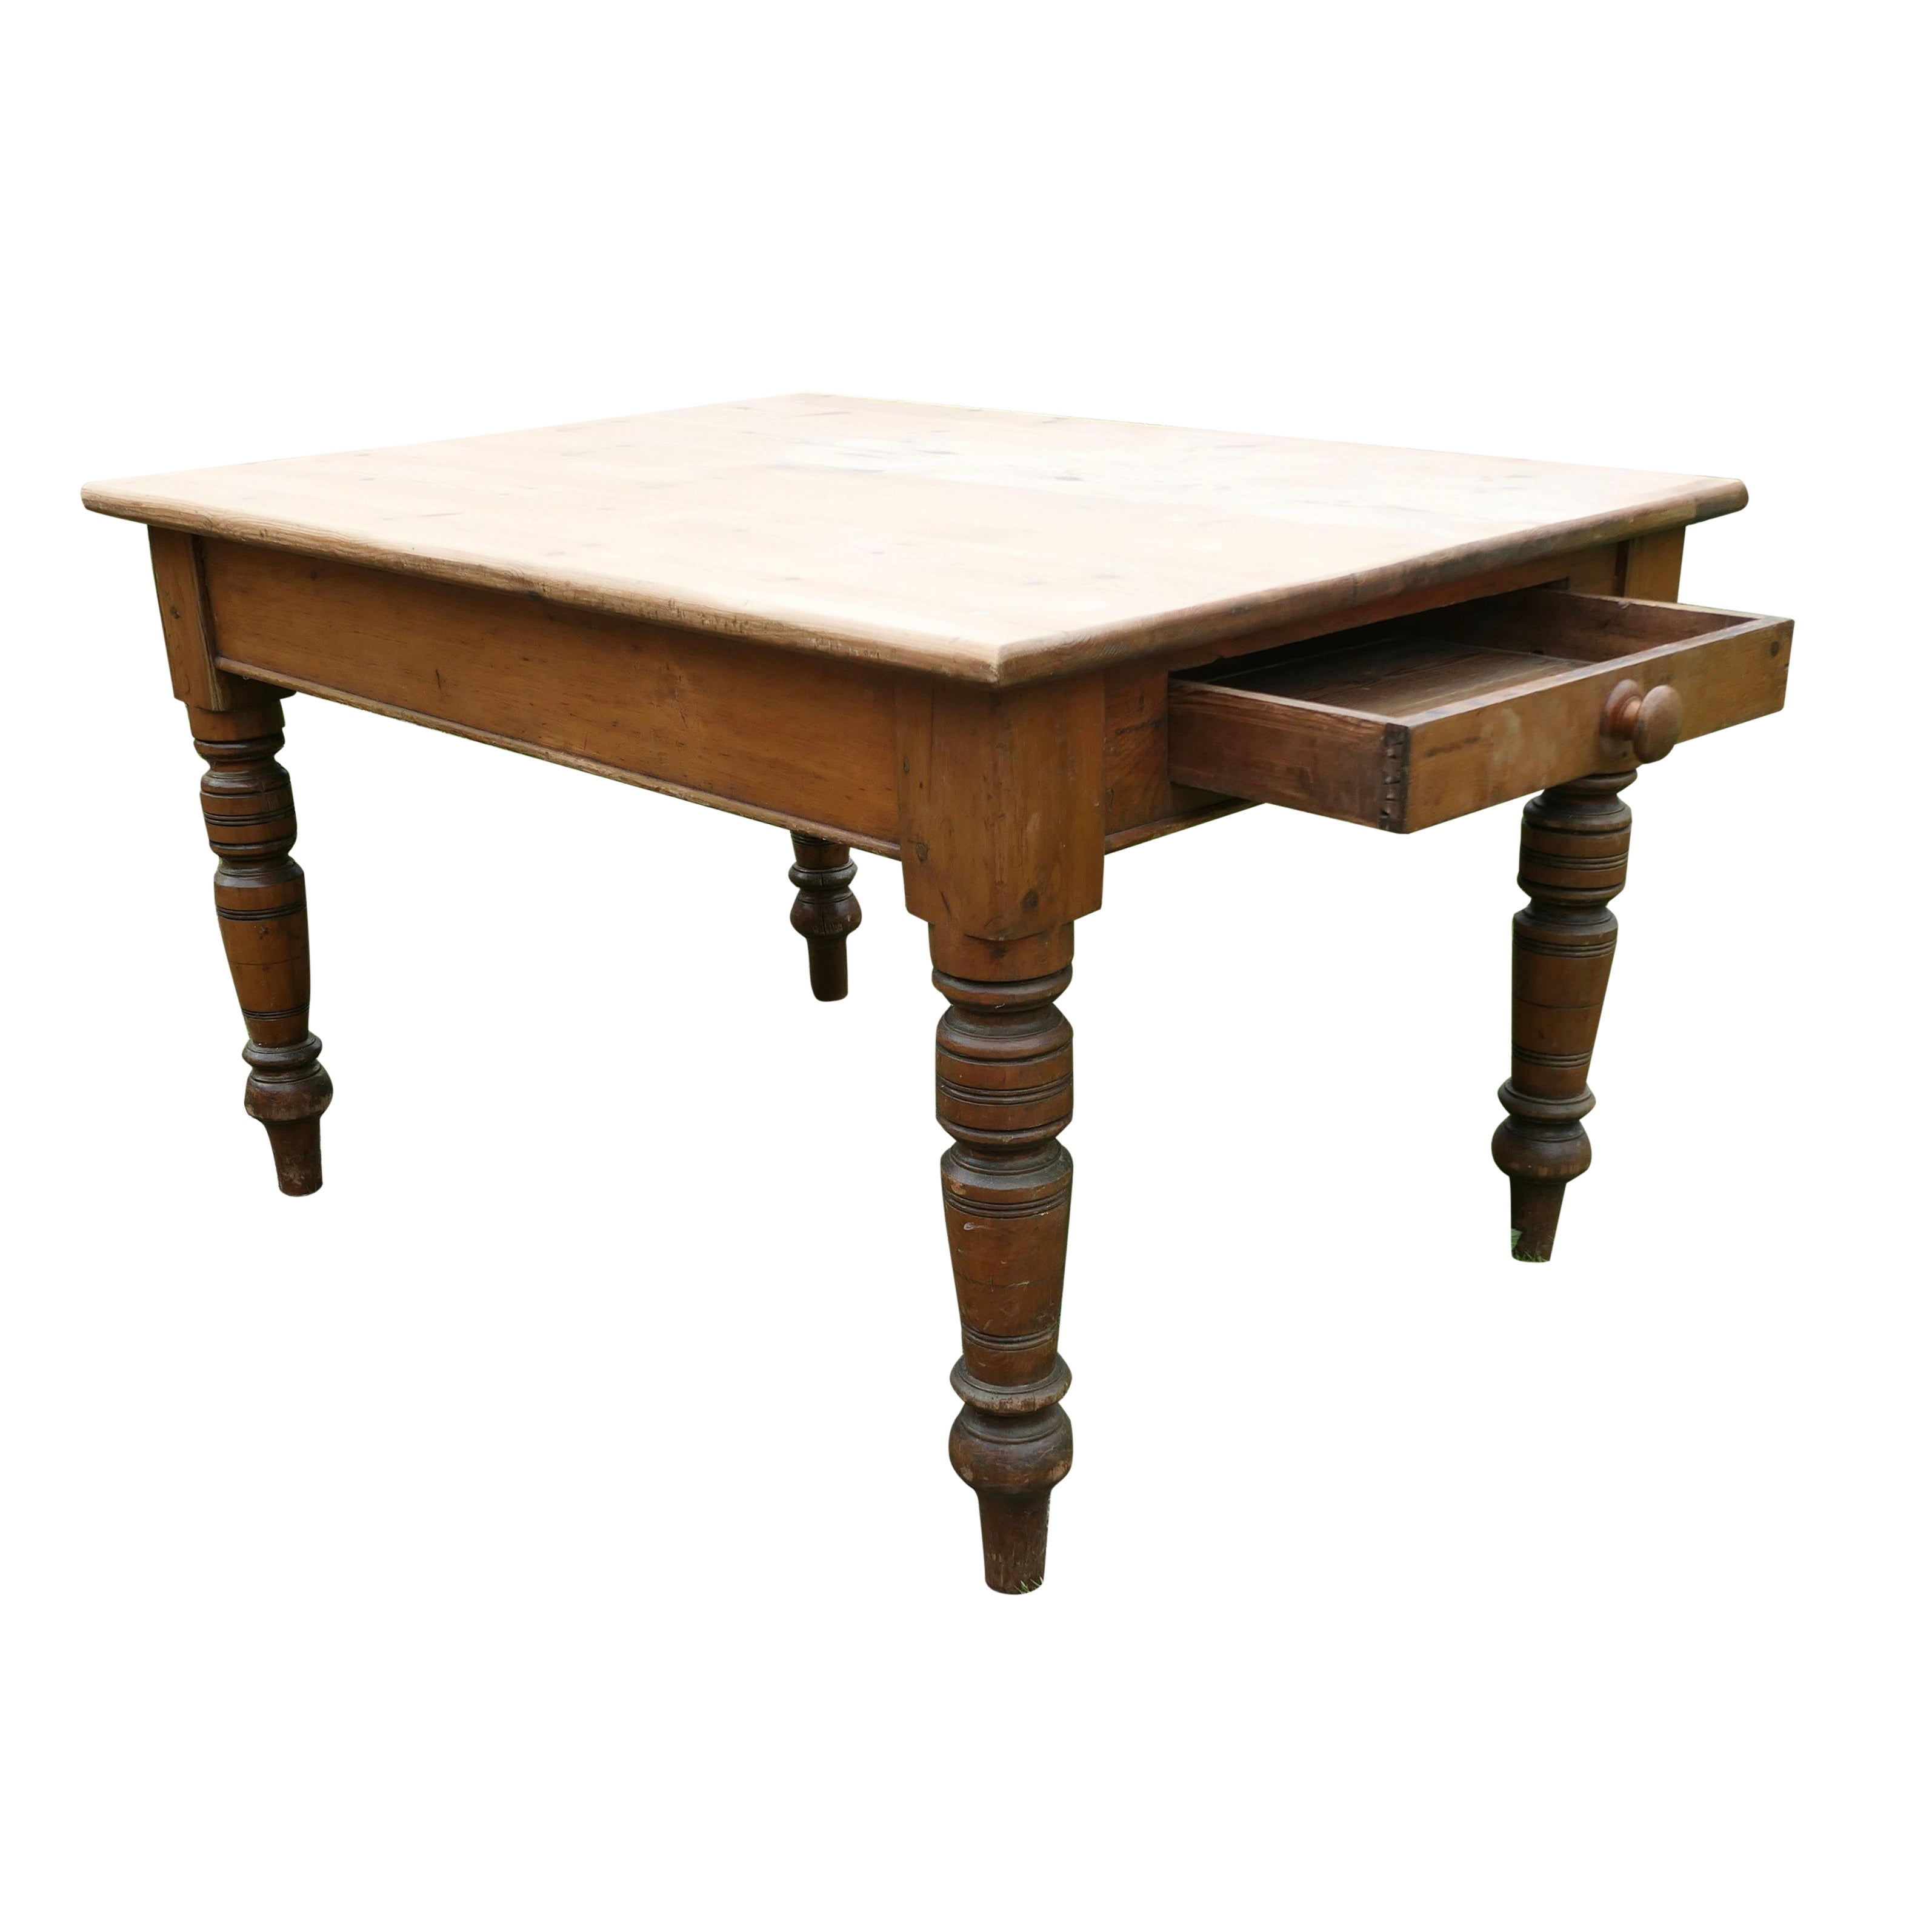 6 Seater Farmhouse Pine Table    This is a good Rustic Farmhouse table 